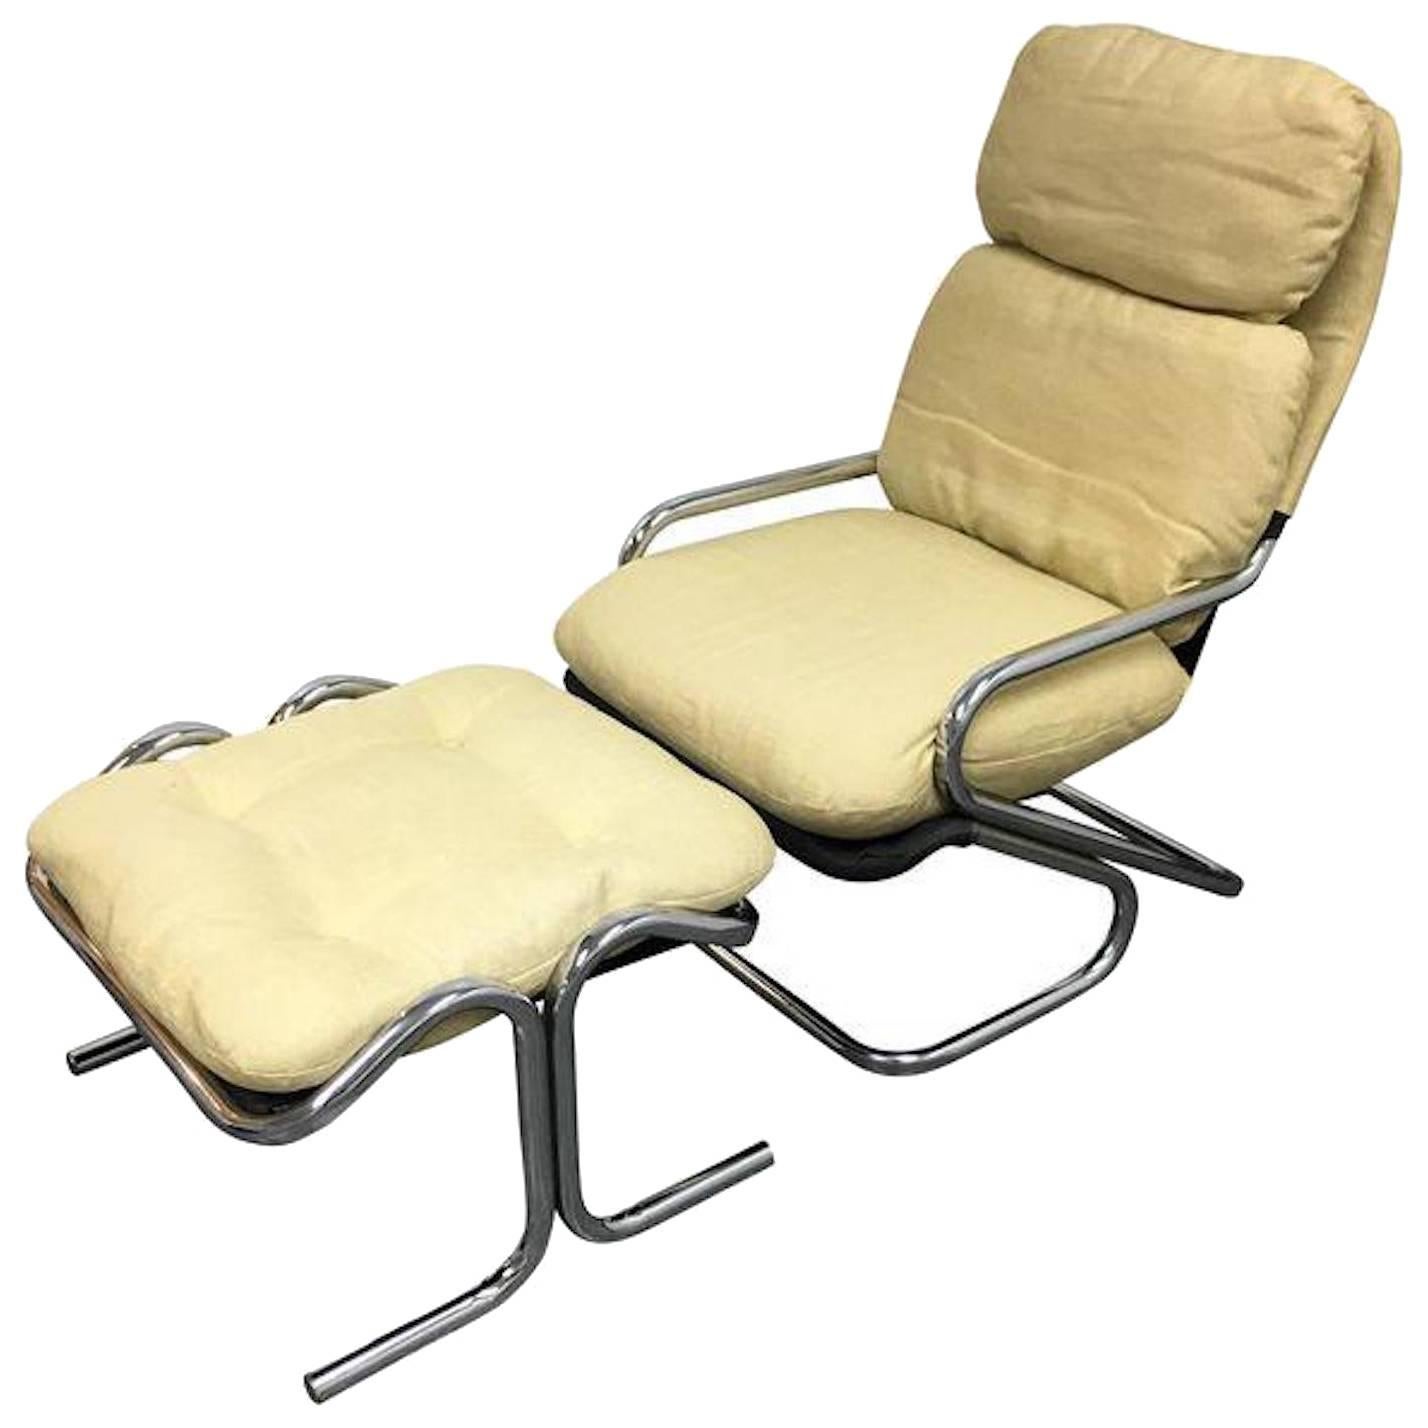 Jerry Johnson Landes Manufacturing Company Sling Chair, Ottoman 